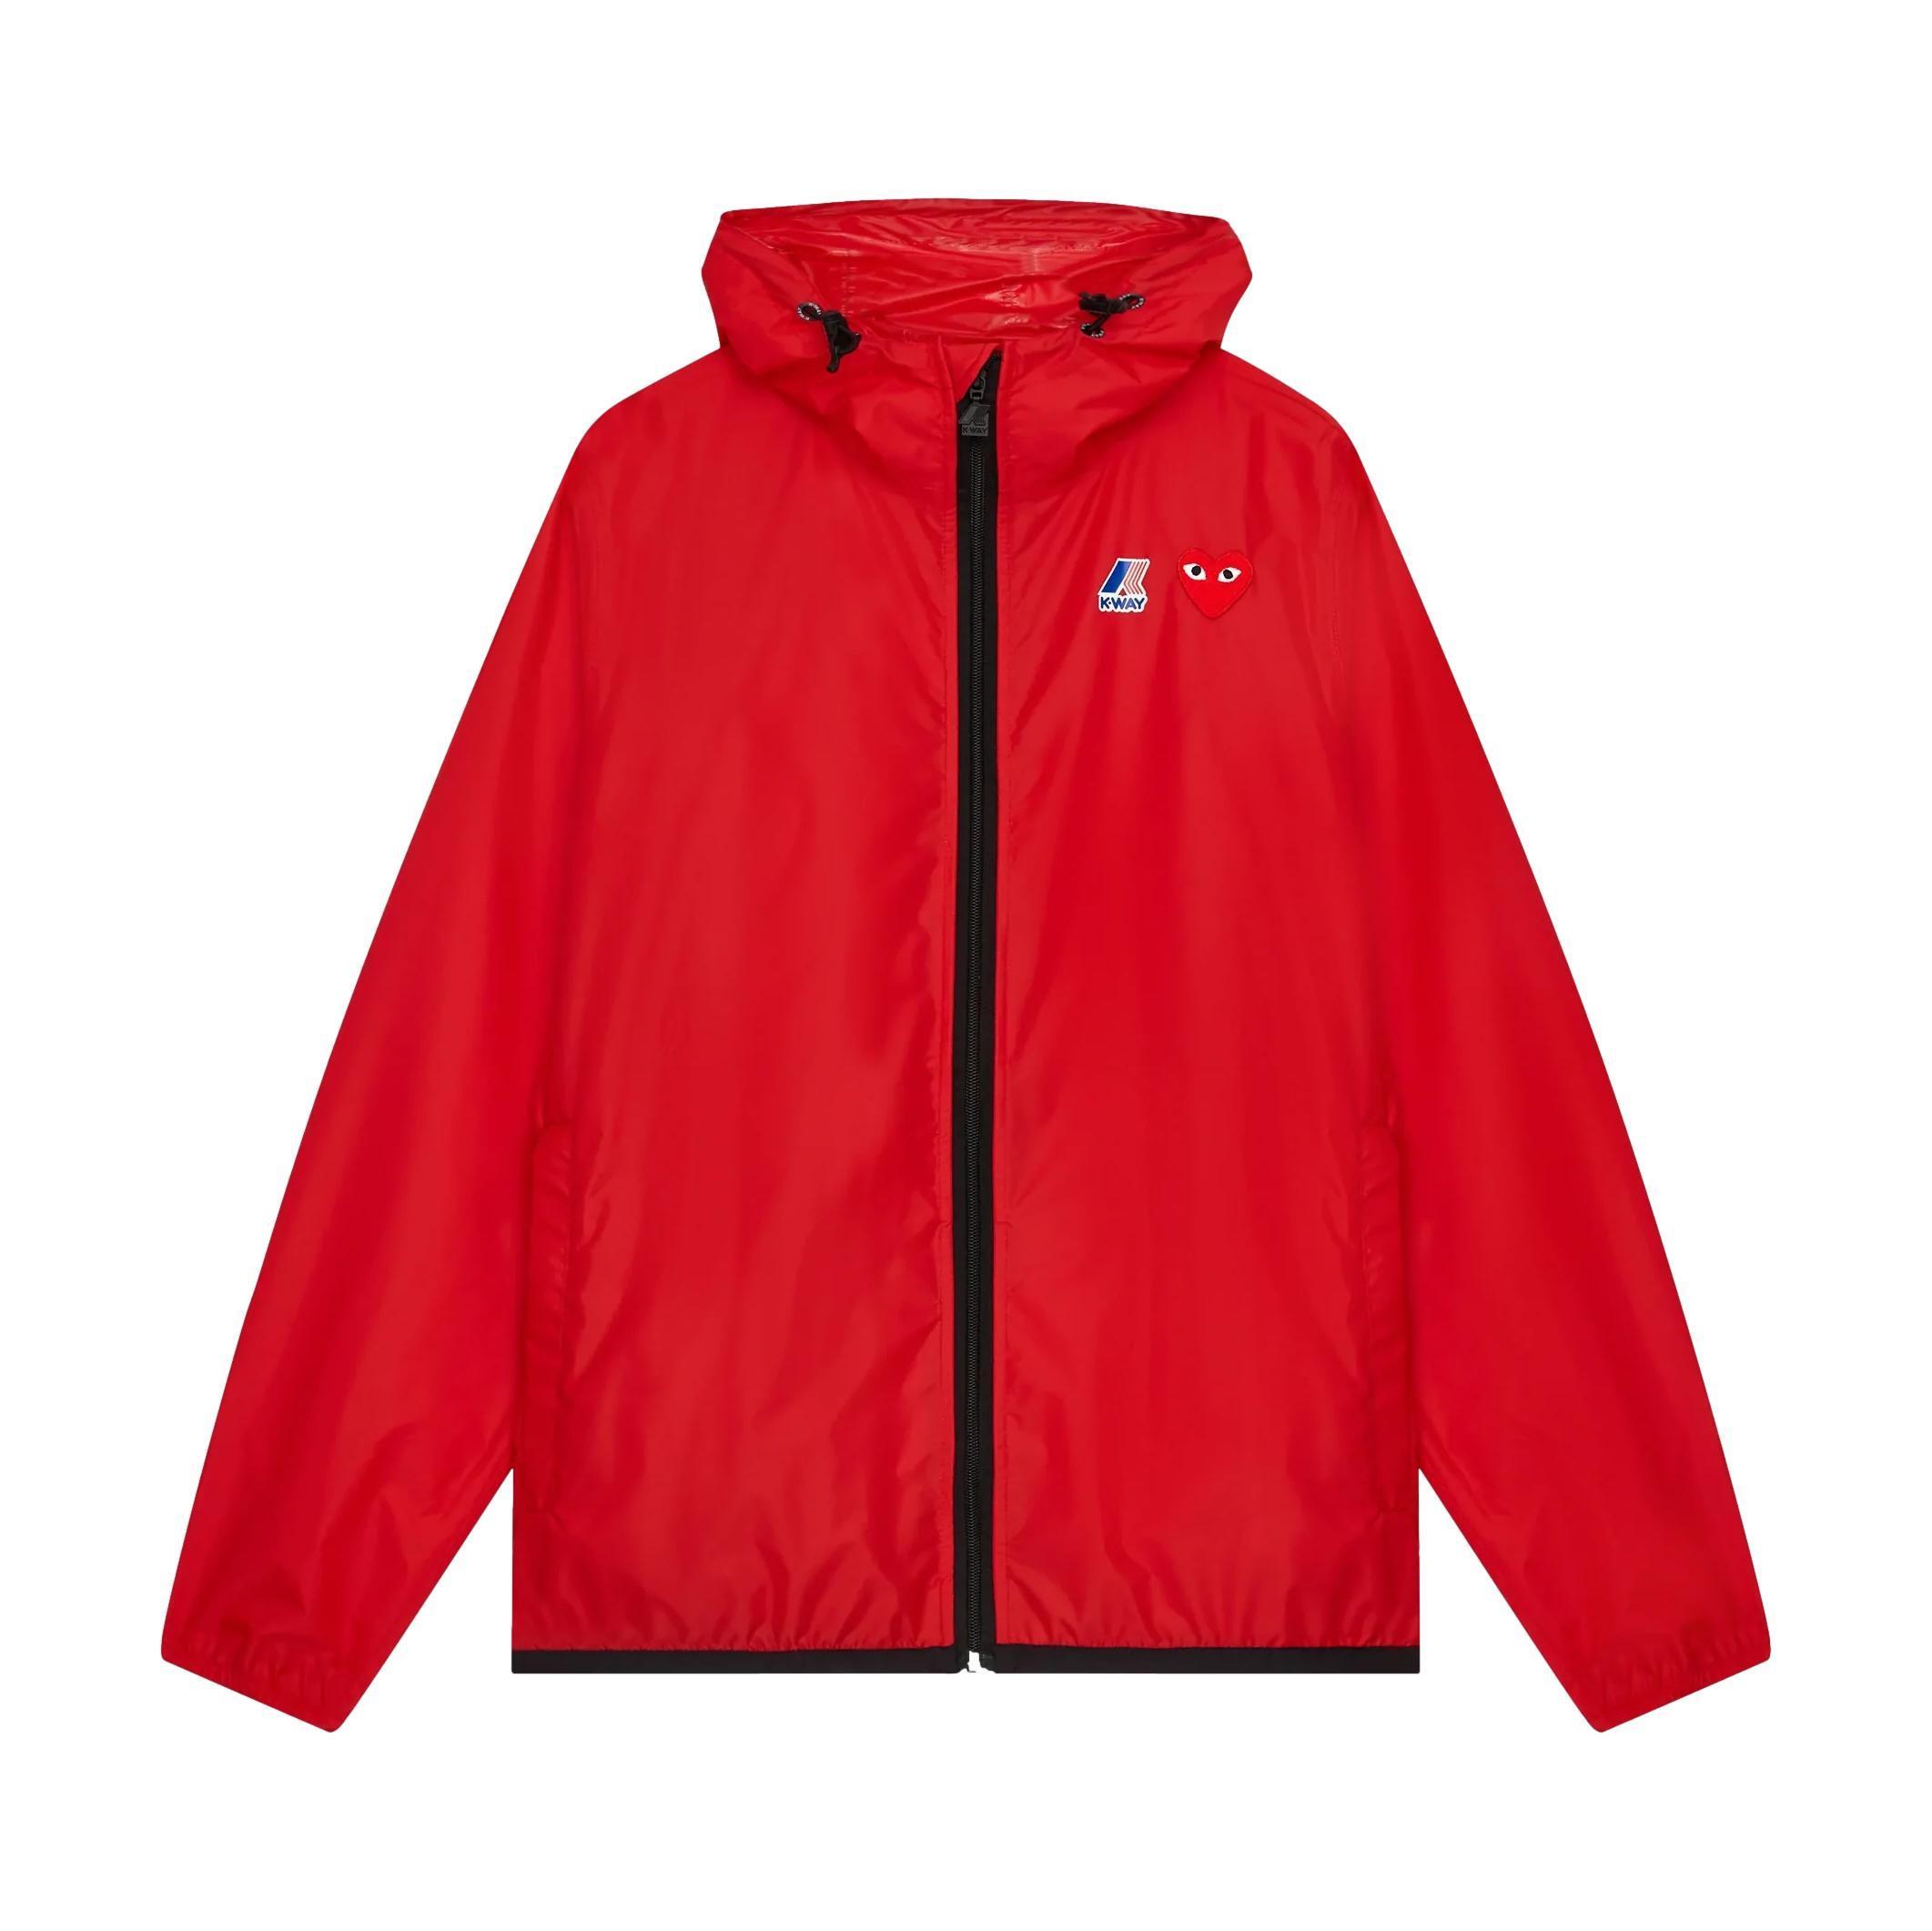 CDG PLAY KWAY HOODED JACKET RED - Gravity NYC